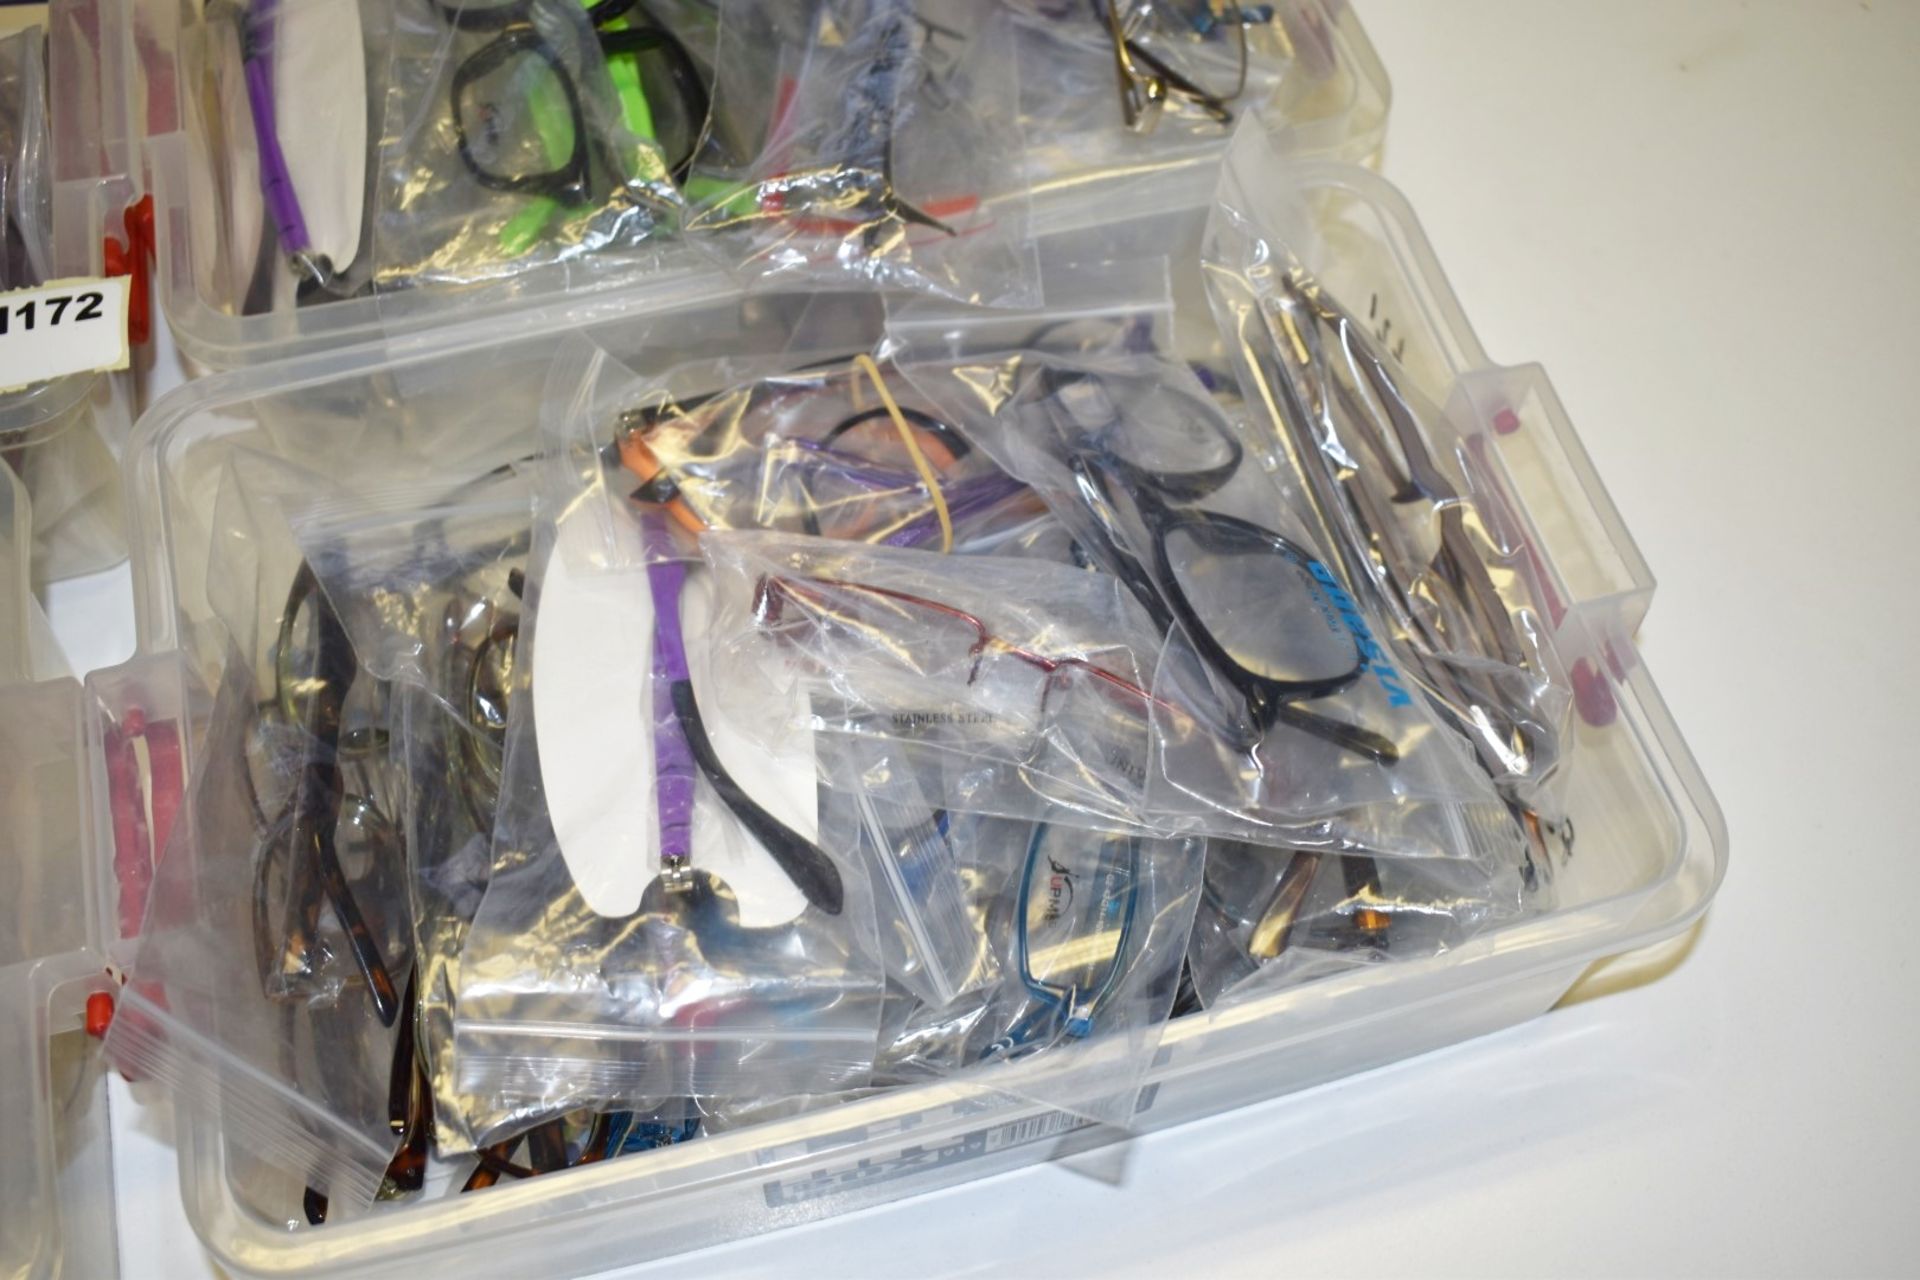 100 x Assorted Pairs of Spectacle Eye Glasses - New and Unused Stock - Various Designs and Brands - Image 4 of 19